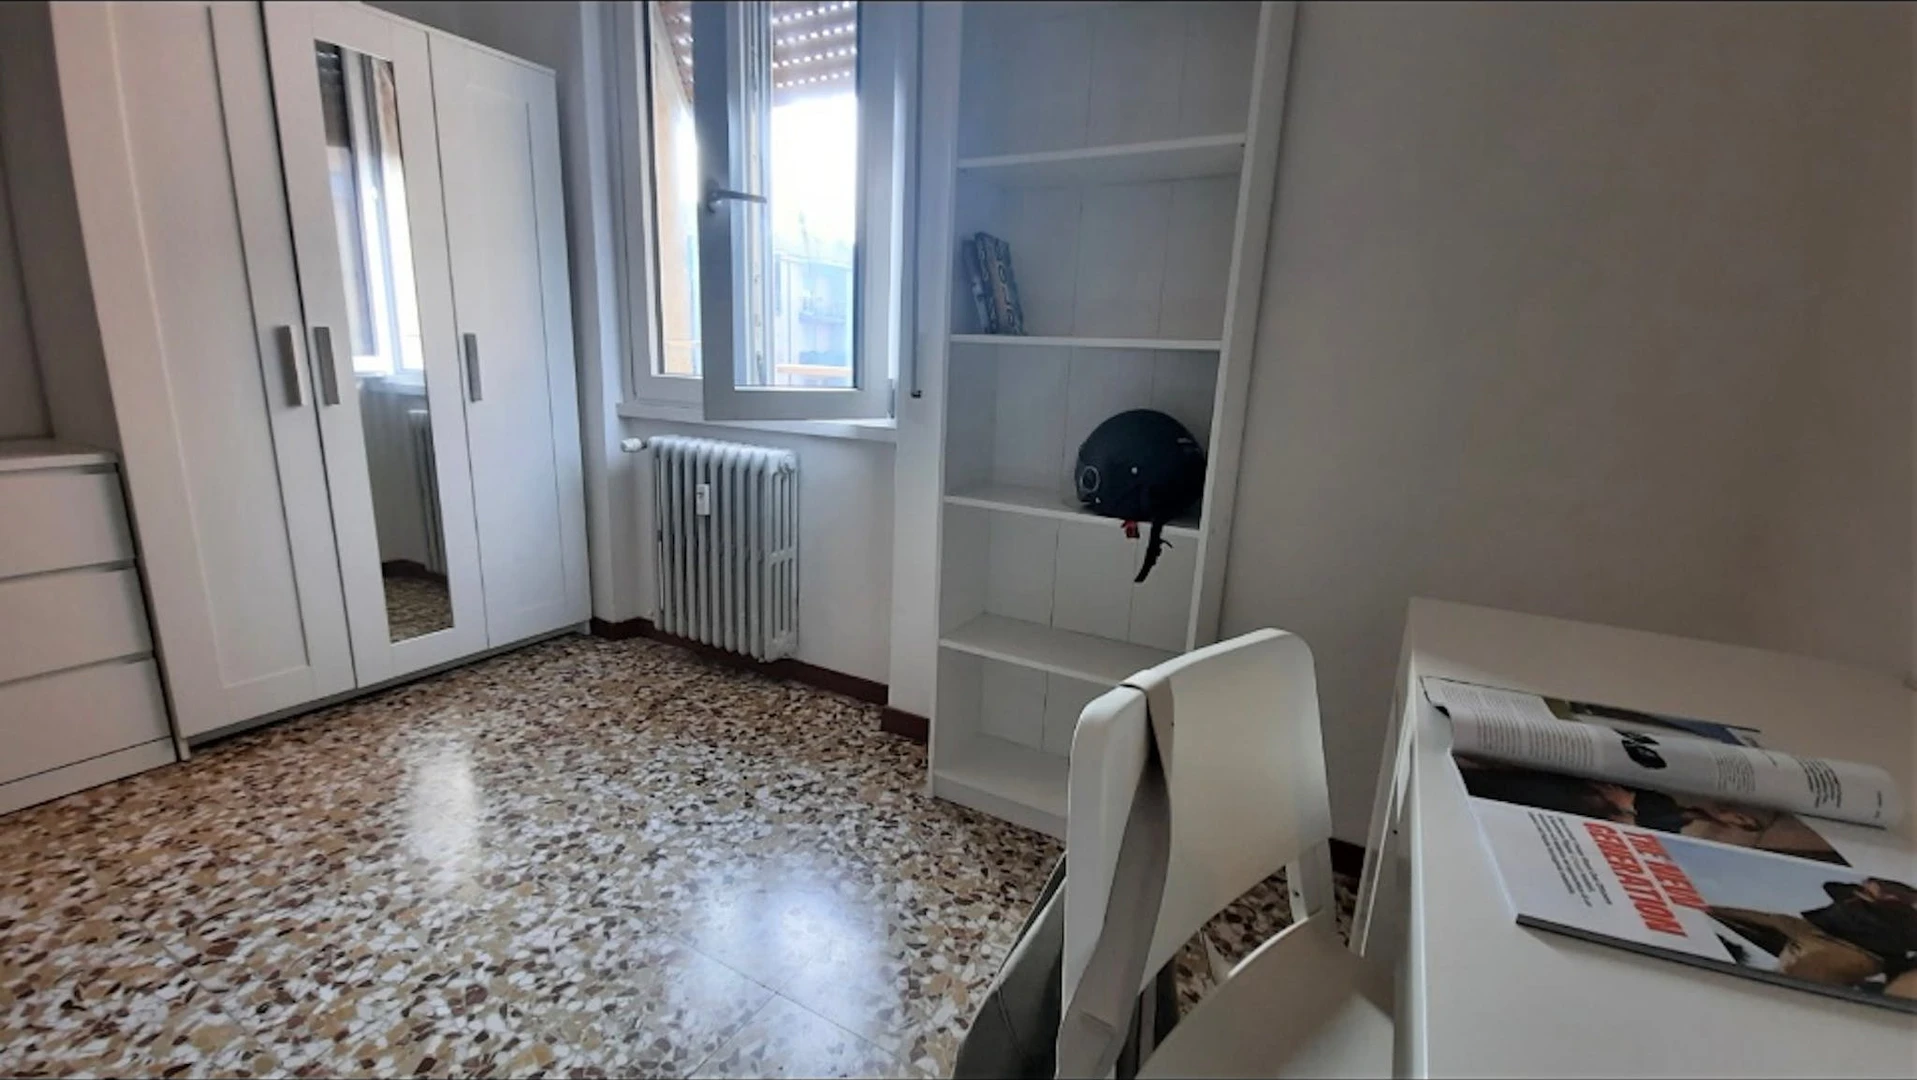 Room for rent with double bed Bergamo